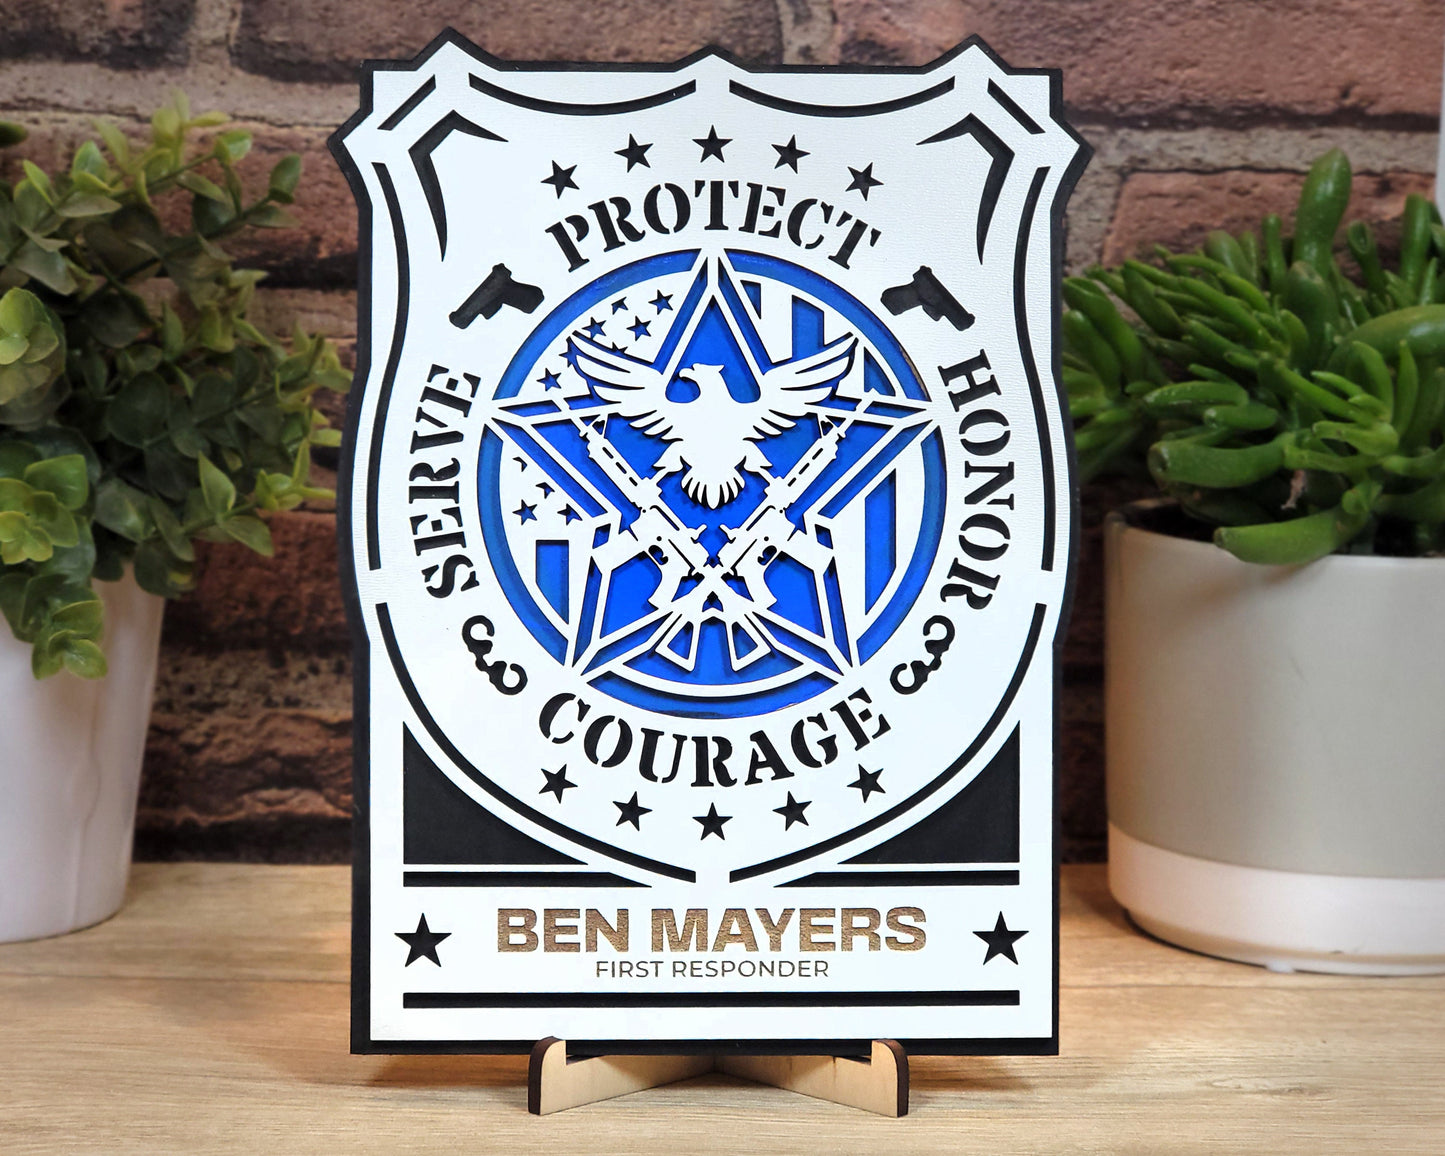 The Rescue Series Signage - Police - 24 Designs - SVG File Download - Sized for Glowforge